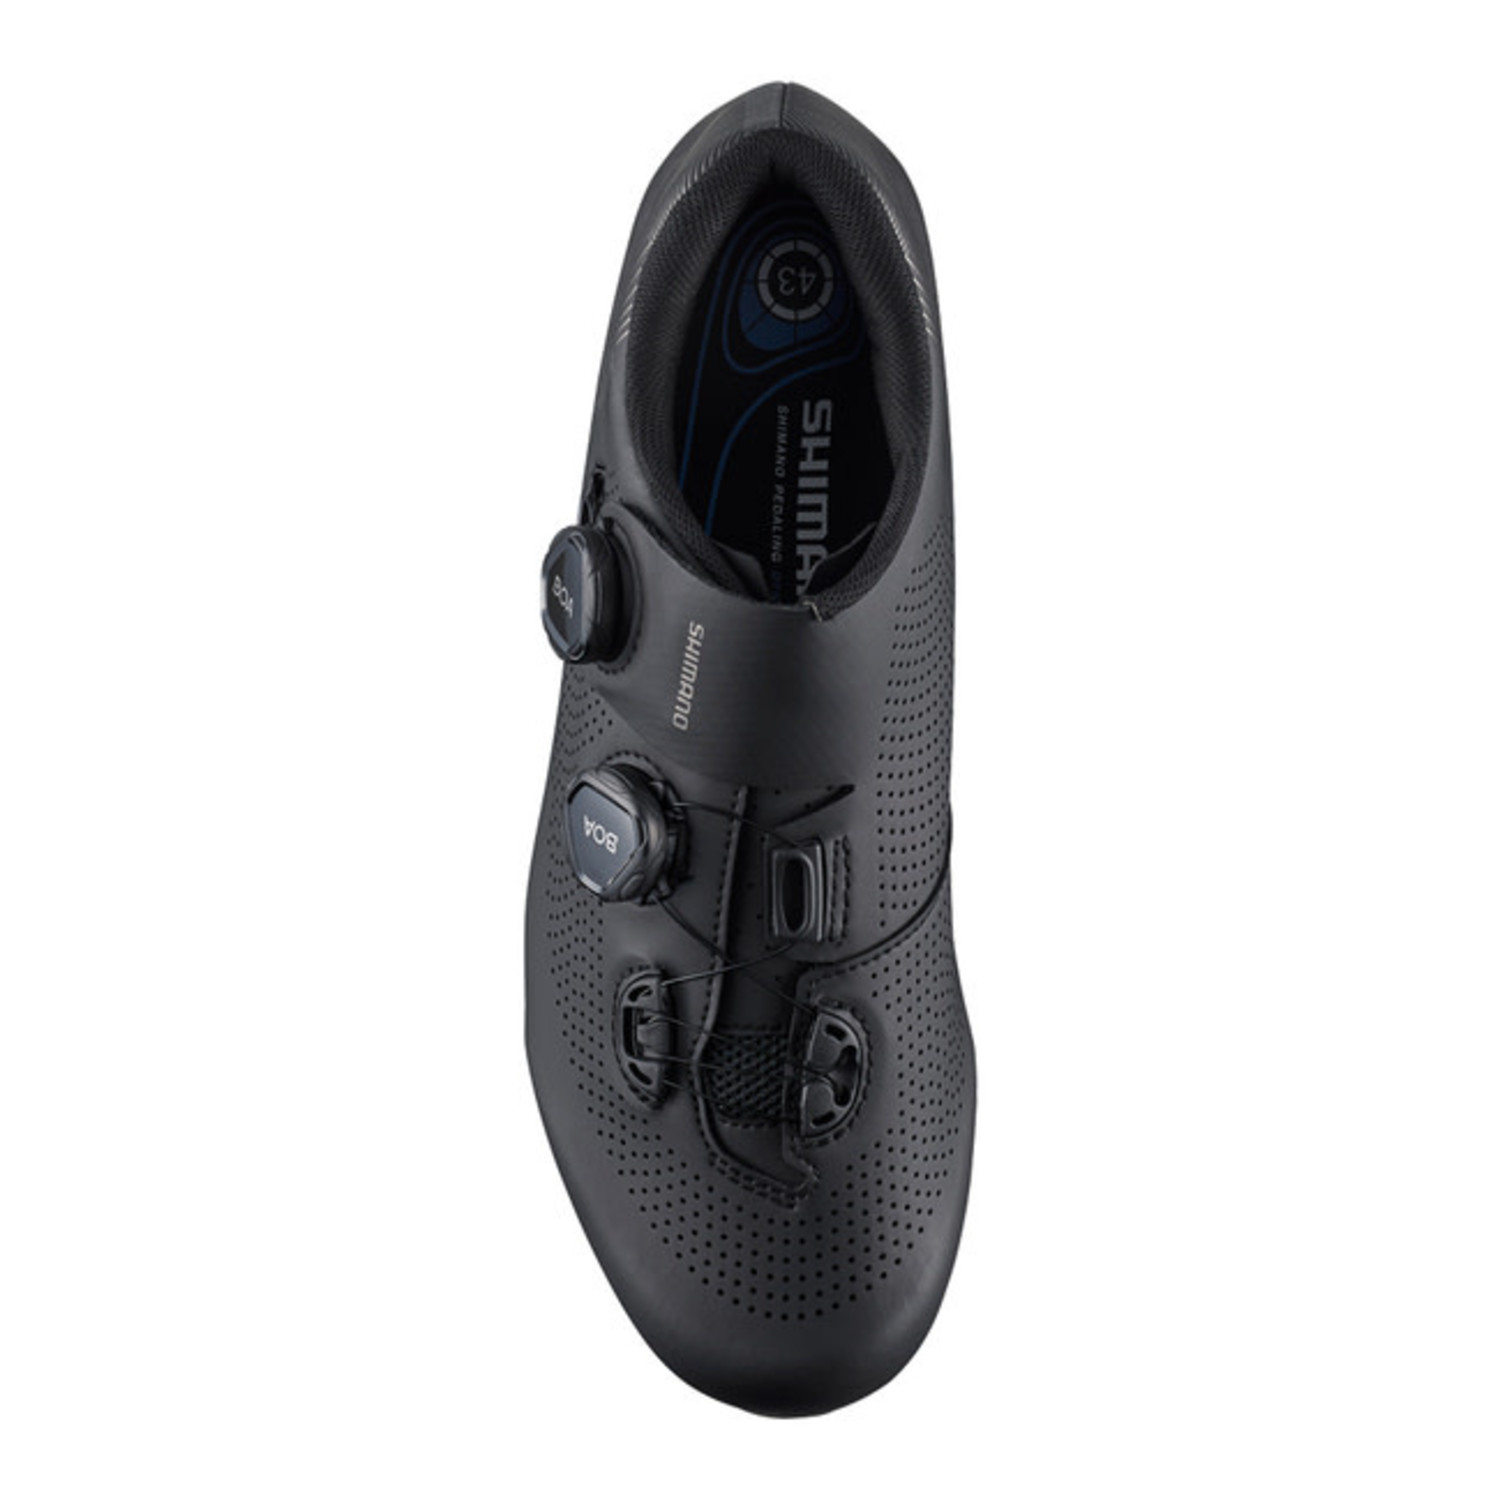 Shimano SH-RC701 Road Shoes | Chain Reaction Bicycles - Chain